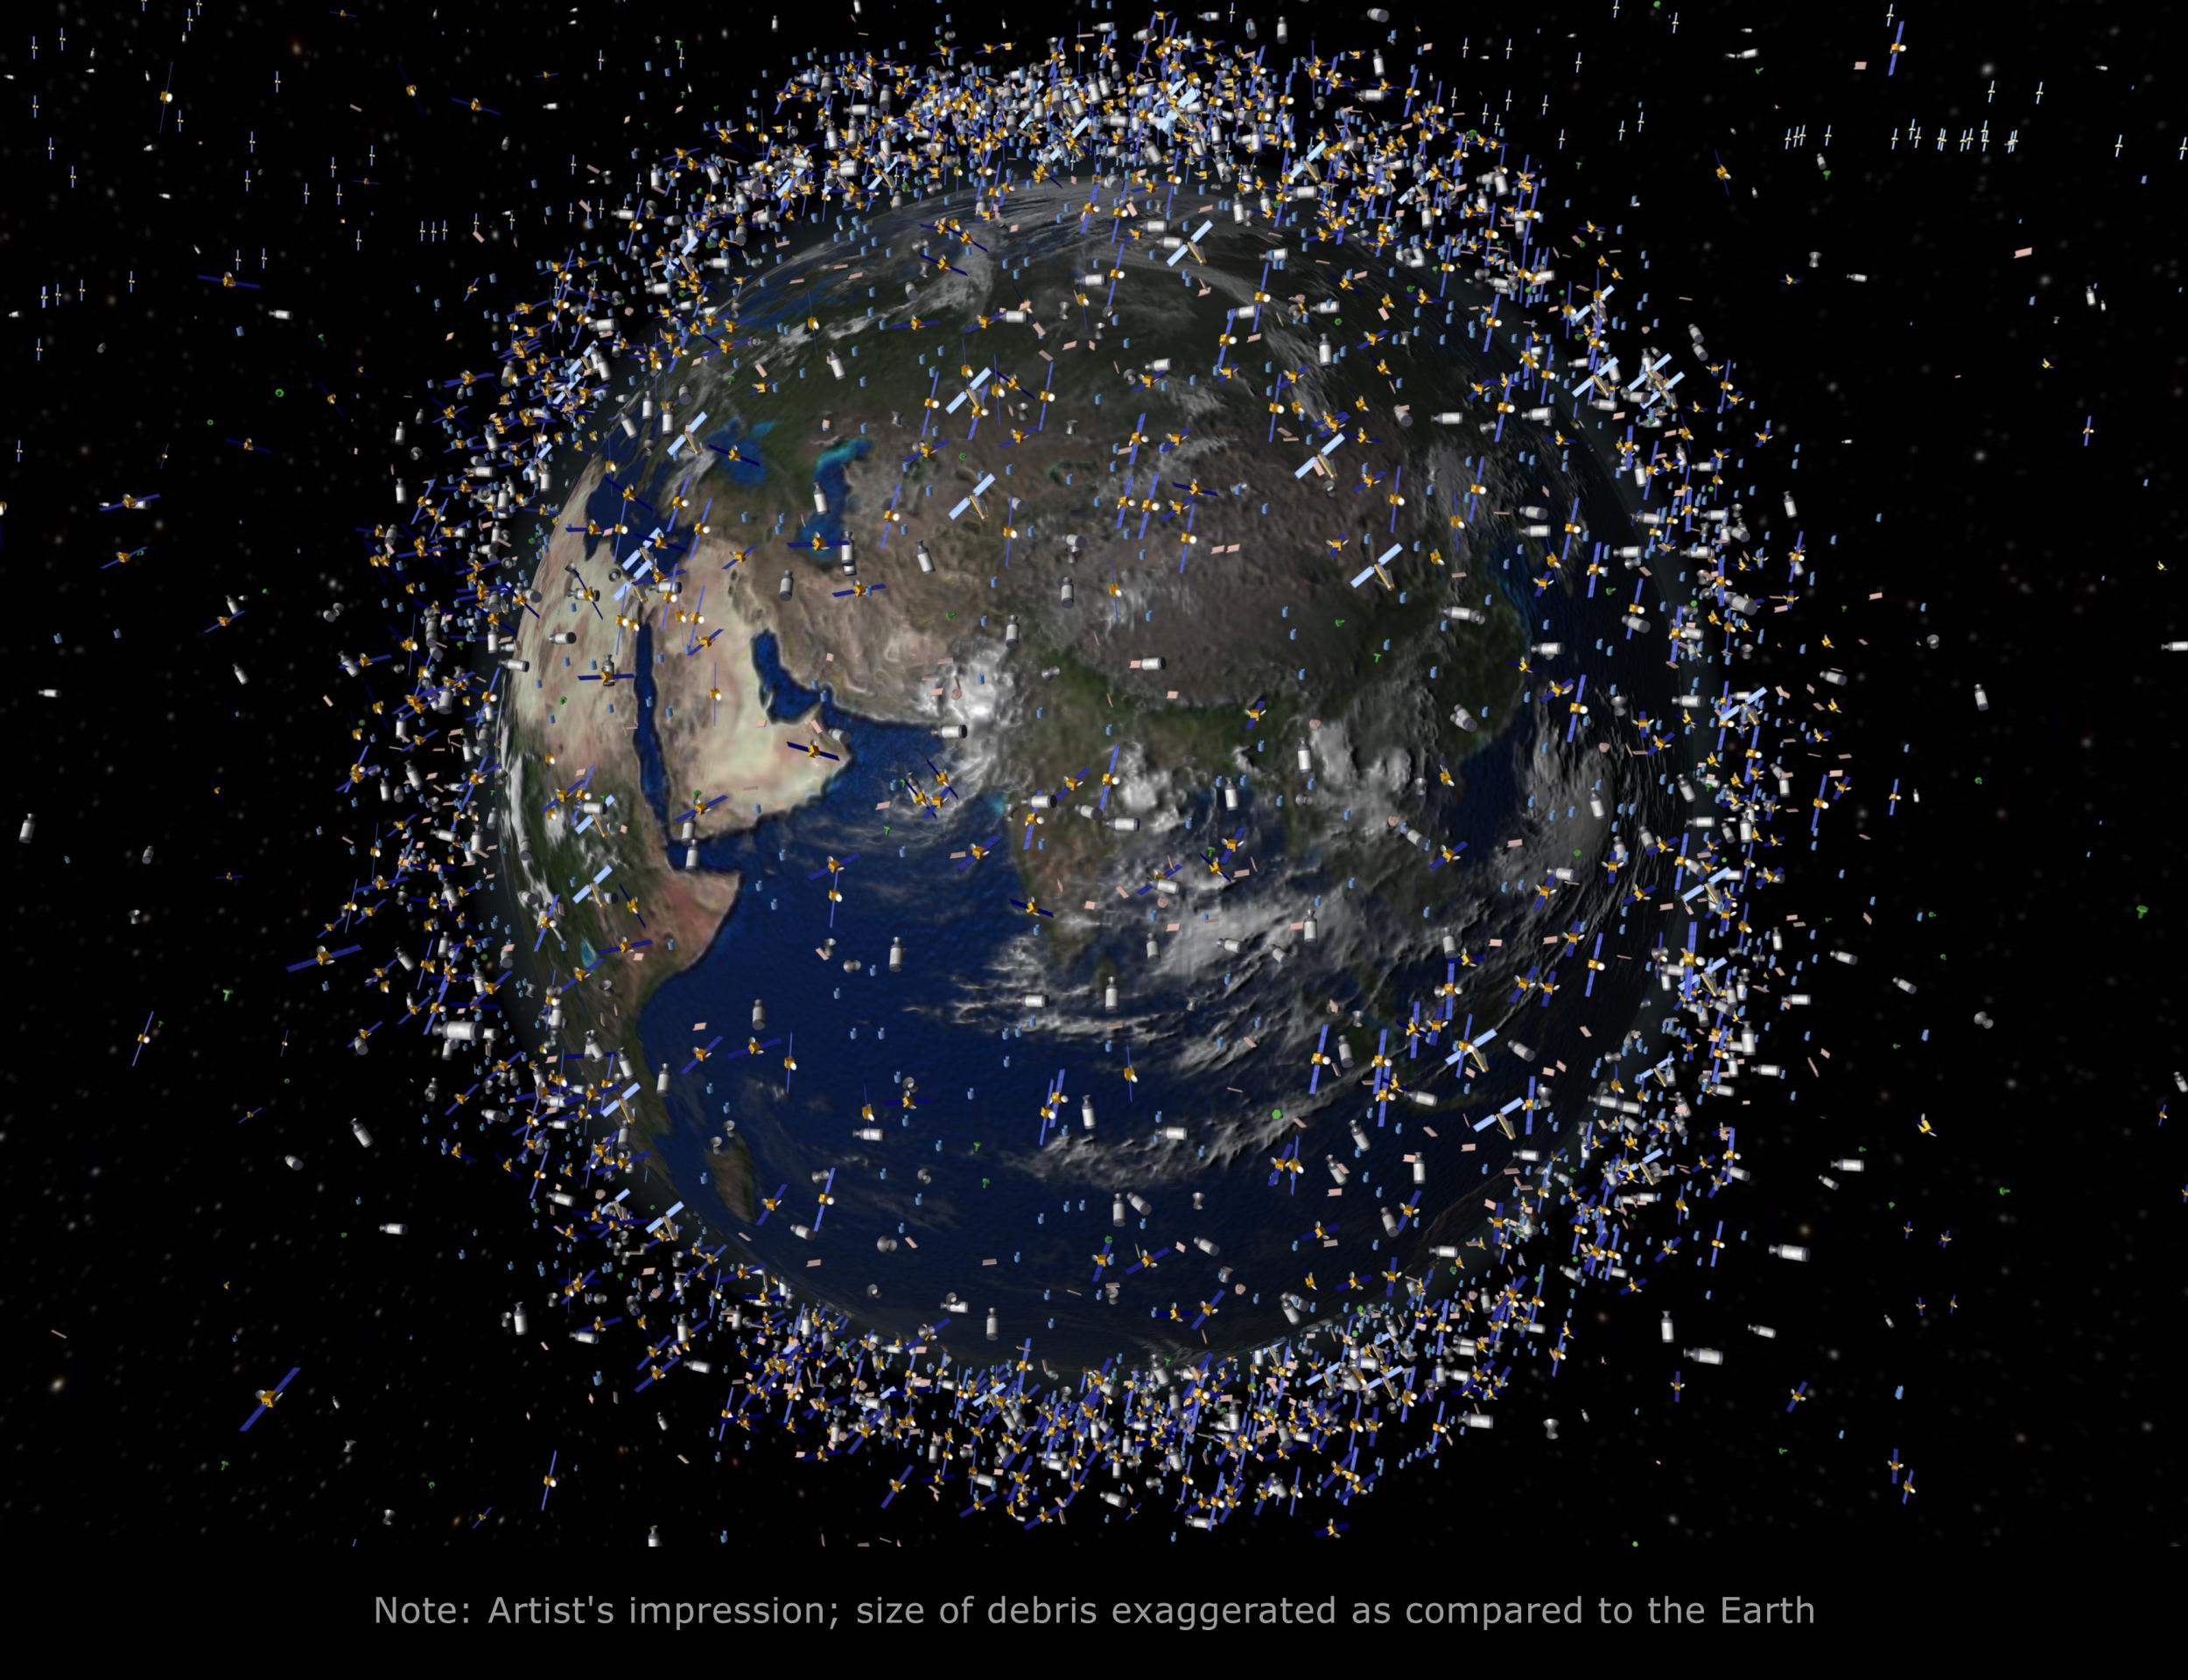 The space debris that surrounds the Earth